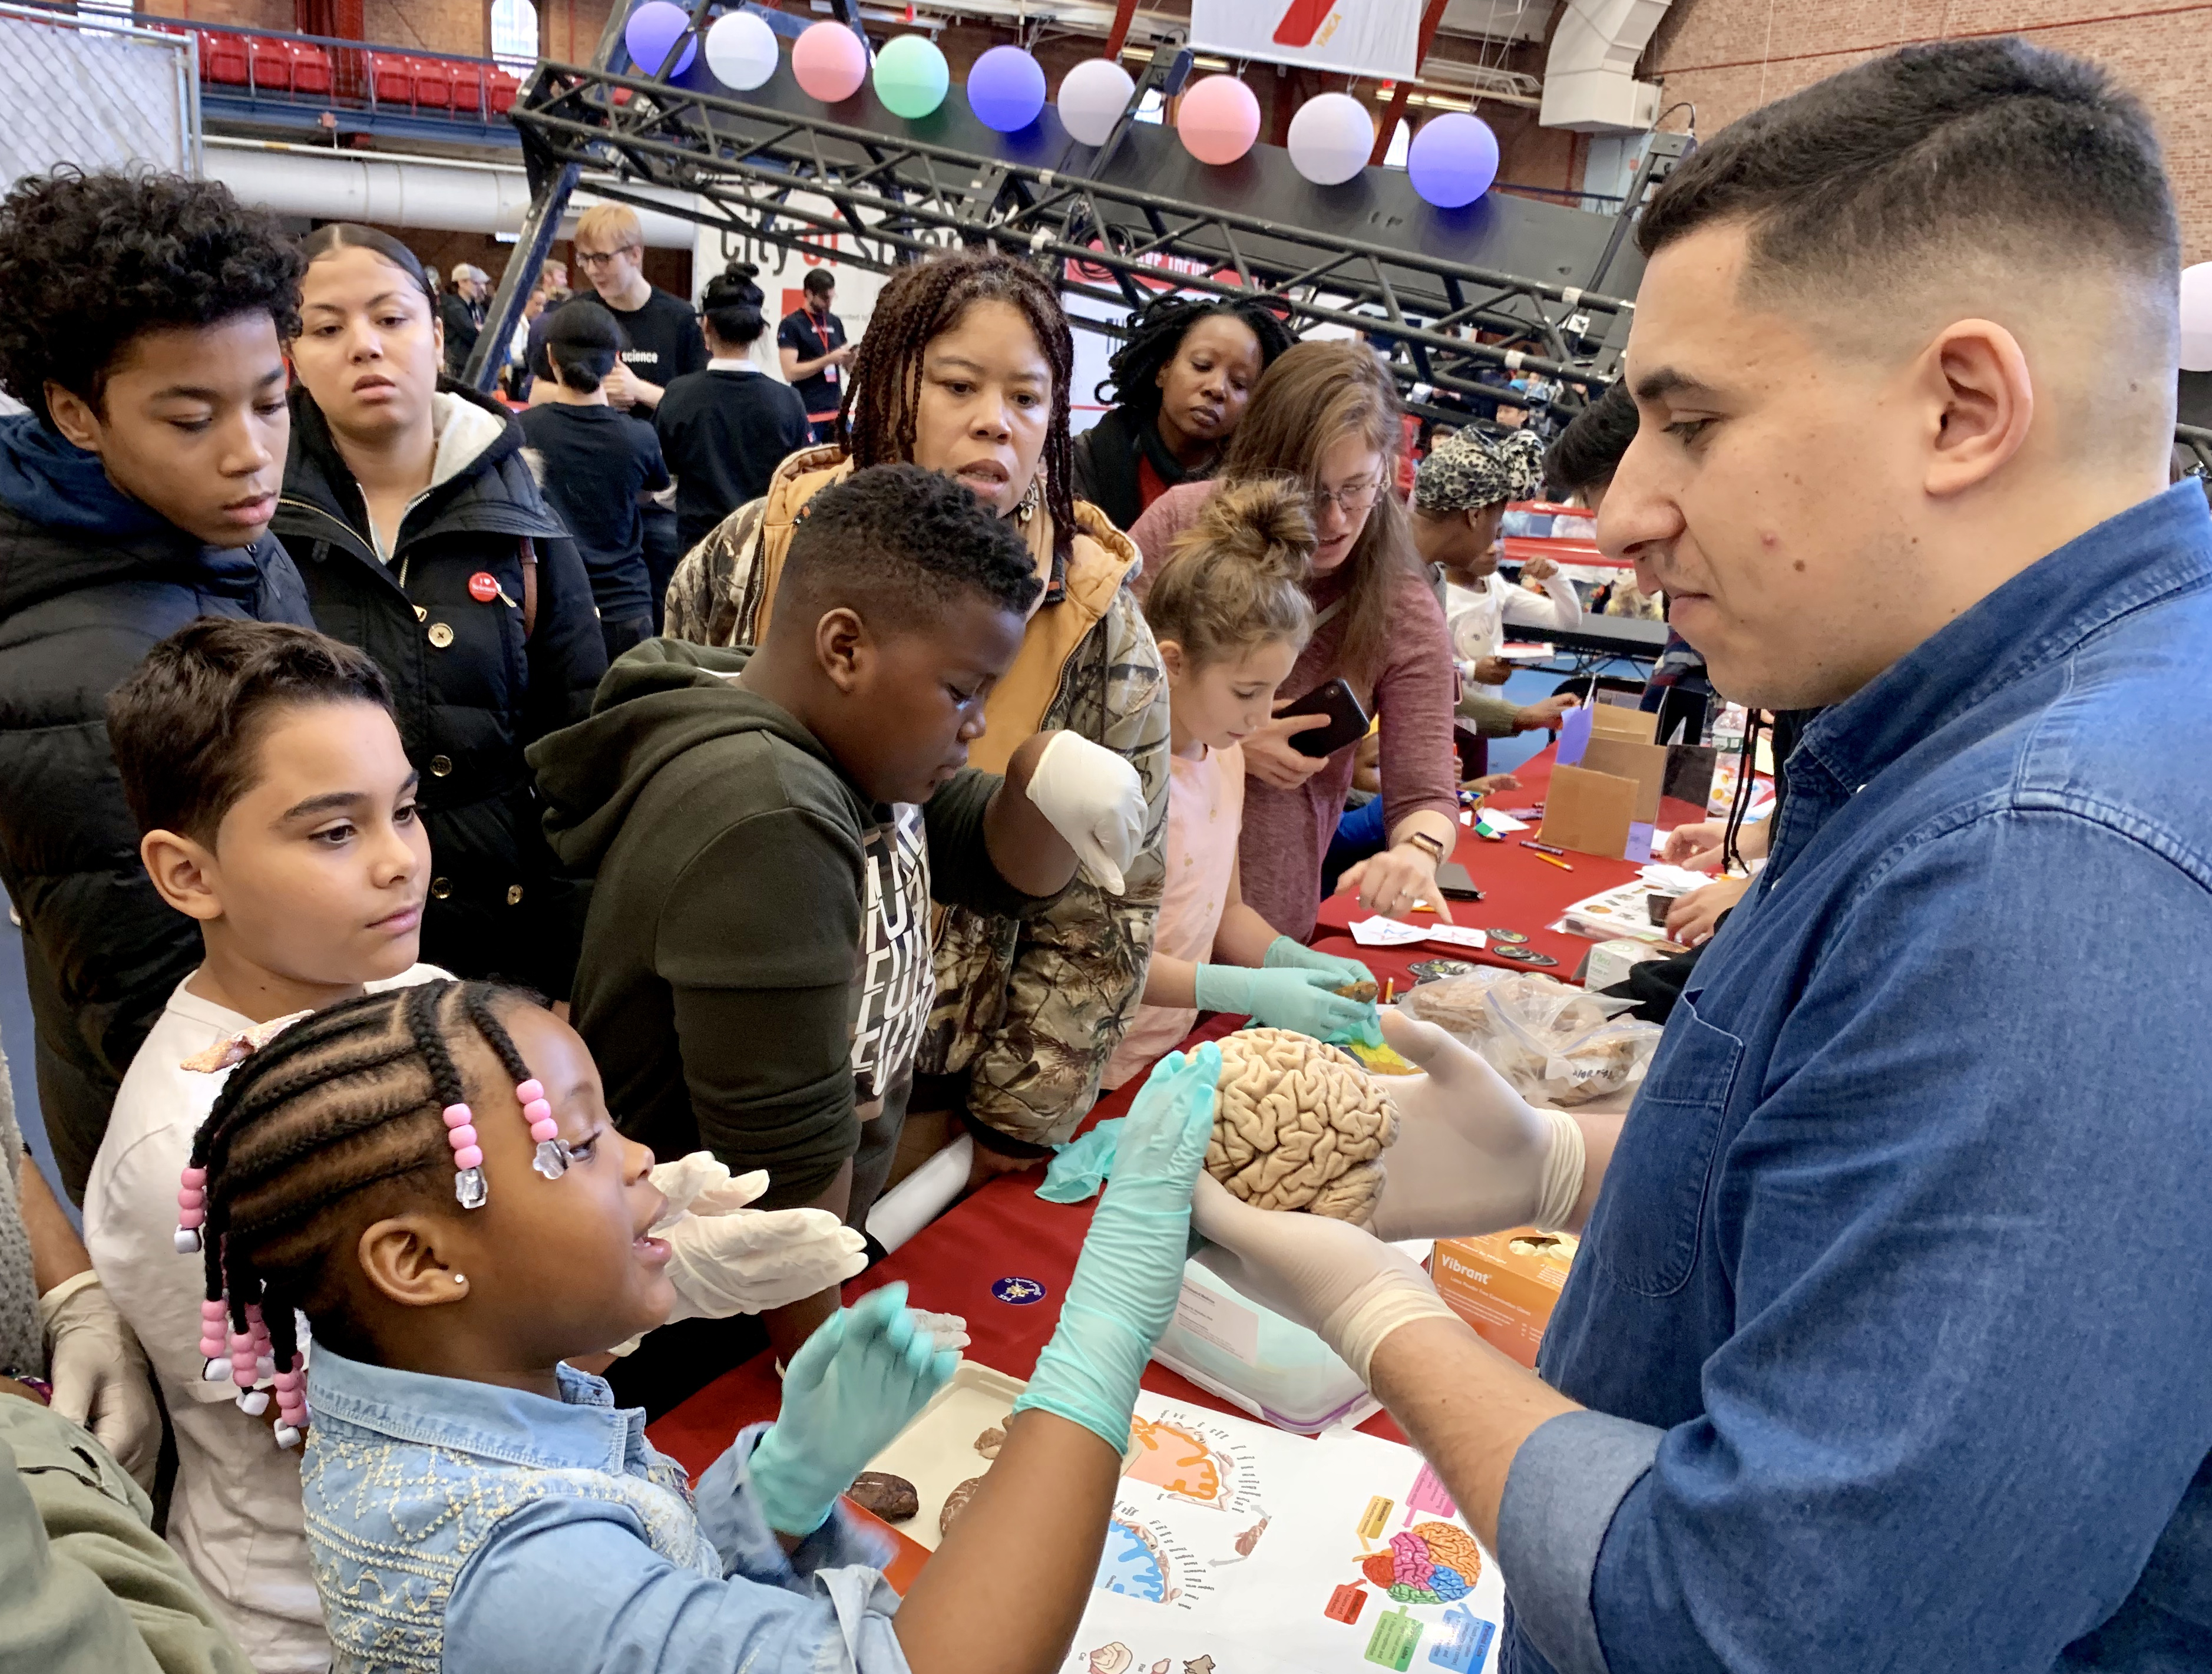 “That’s a real brain!” Kids learned neuroscience with braiNY. Photo: Mary Frost/Brooklyn Eagle